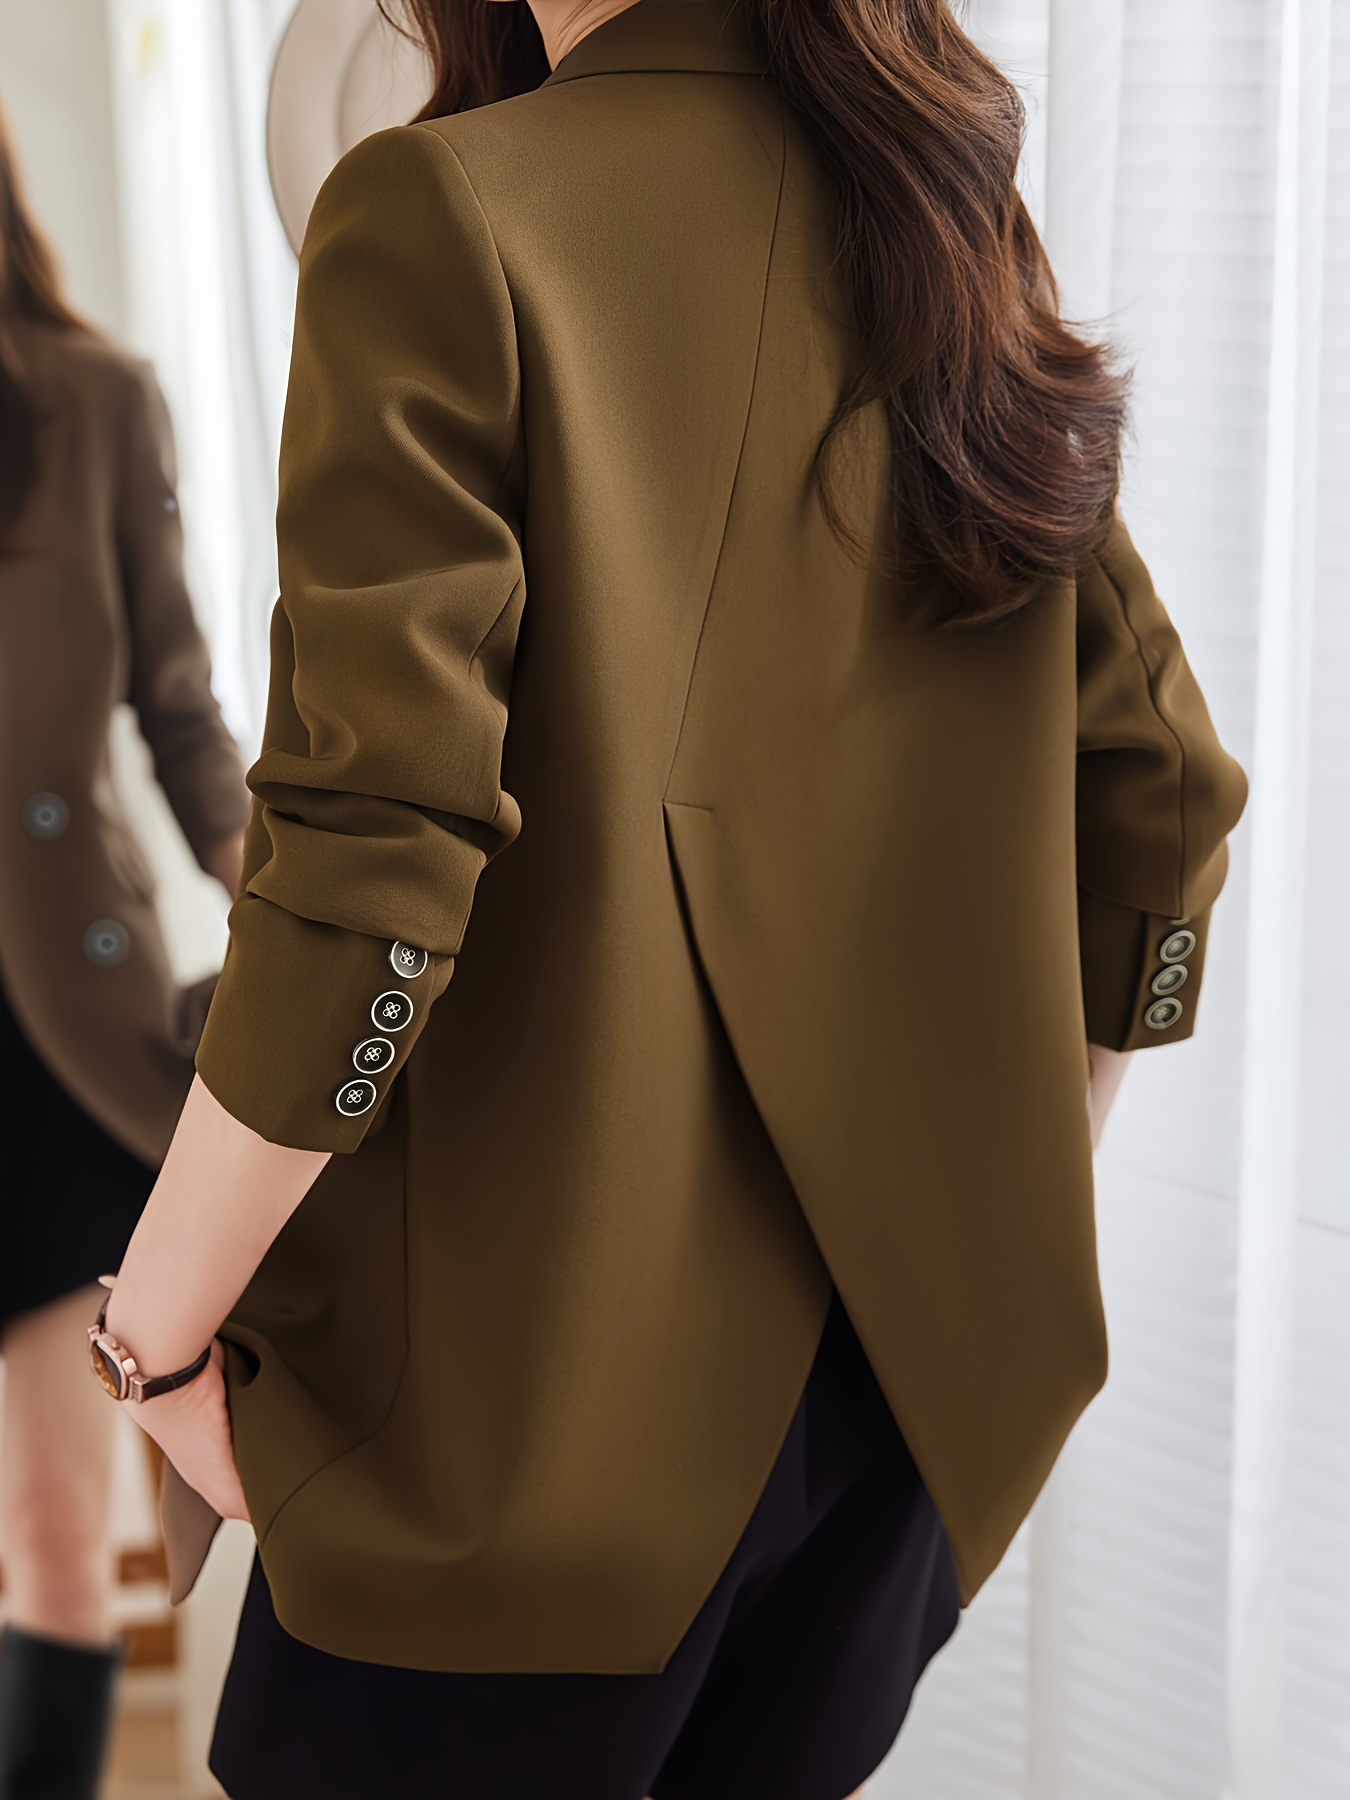 Single Breasted Lapel Blazer, Casual Solid Open Front Work Office Outerwear, Women’s Clothing